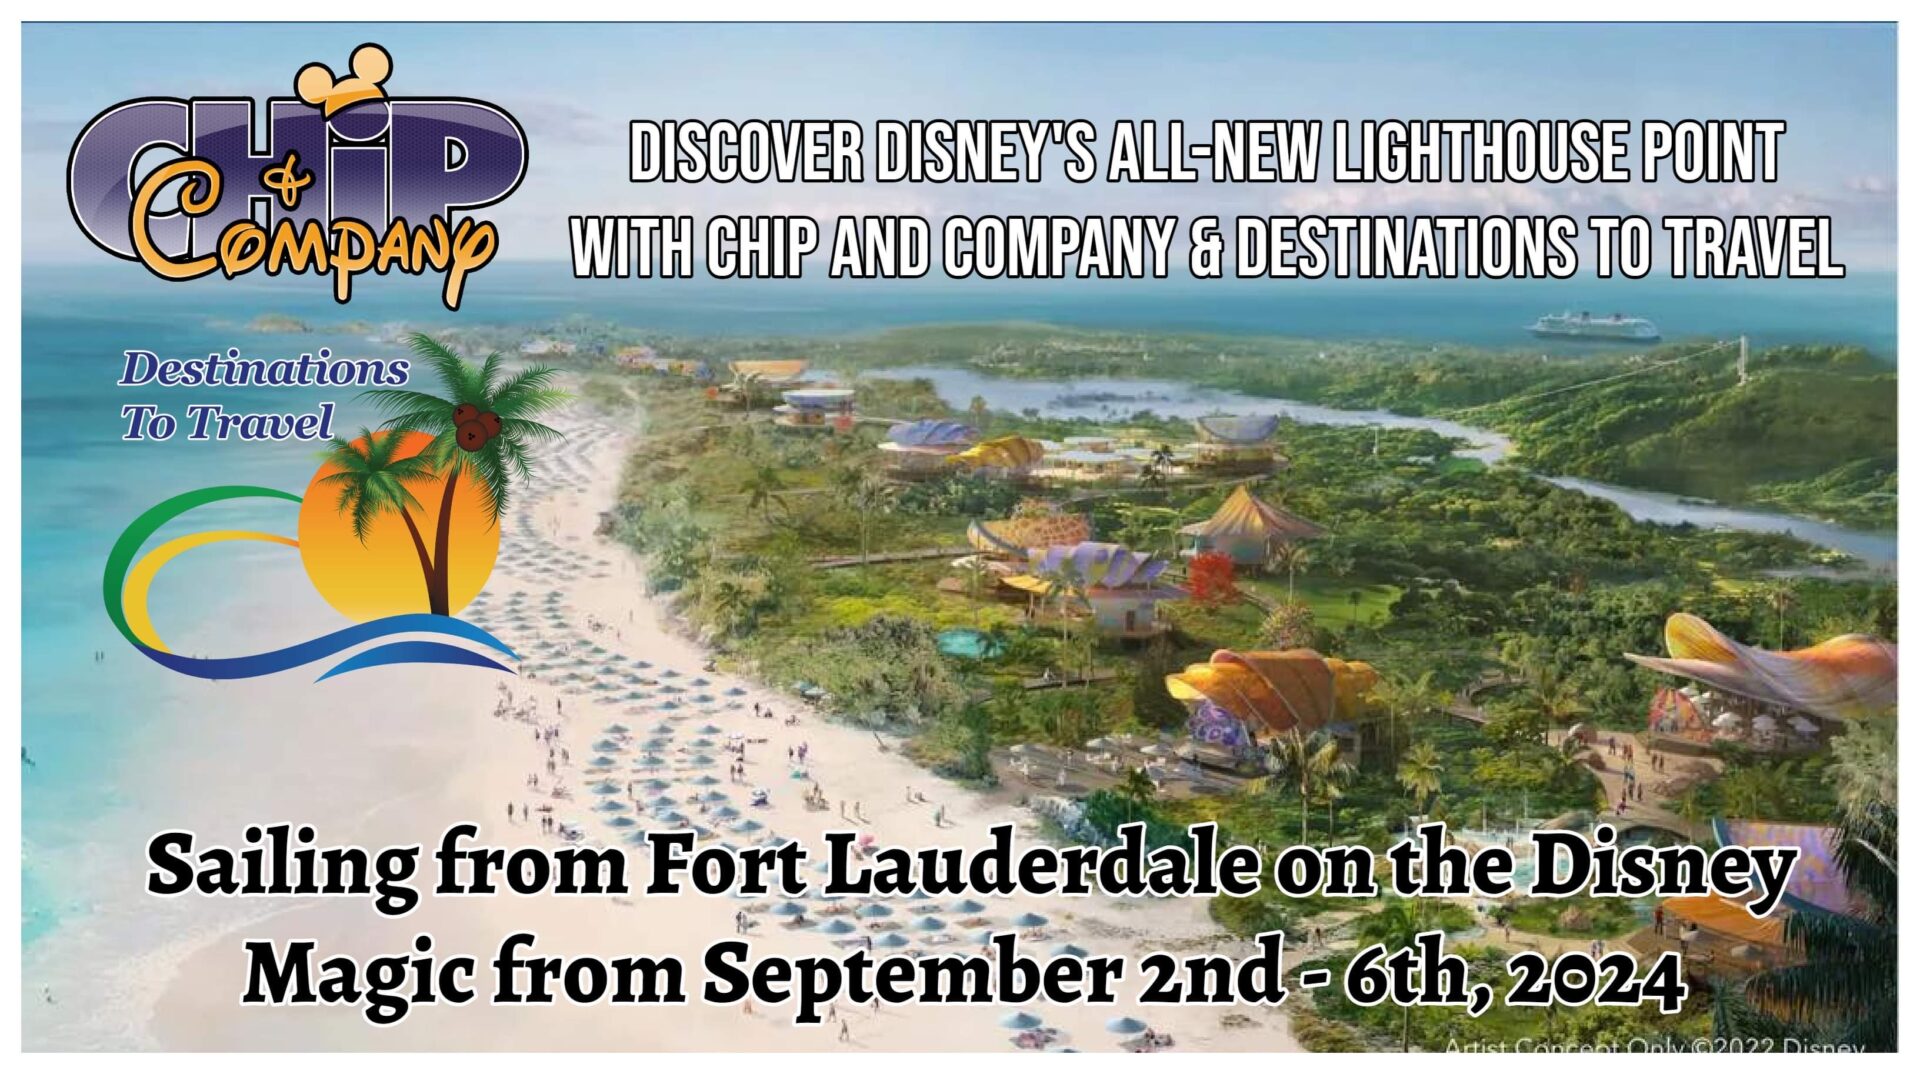 Join us for the Chip and Company & Destinations to Travel Disney Cruise to Lighthouse Point